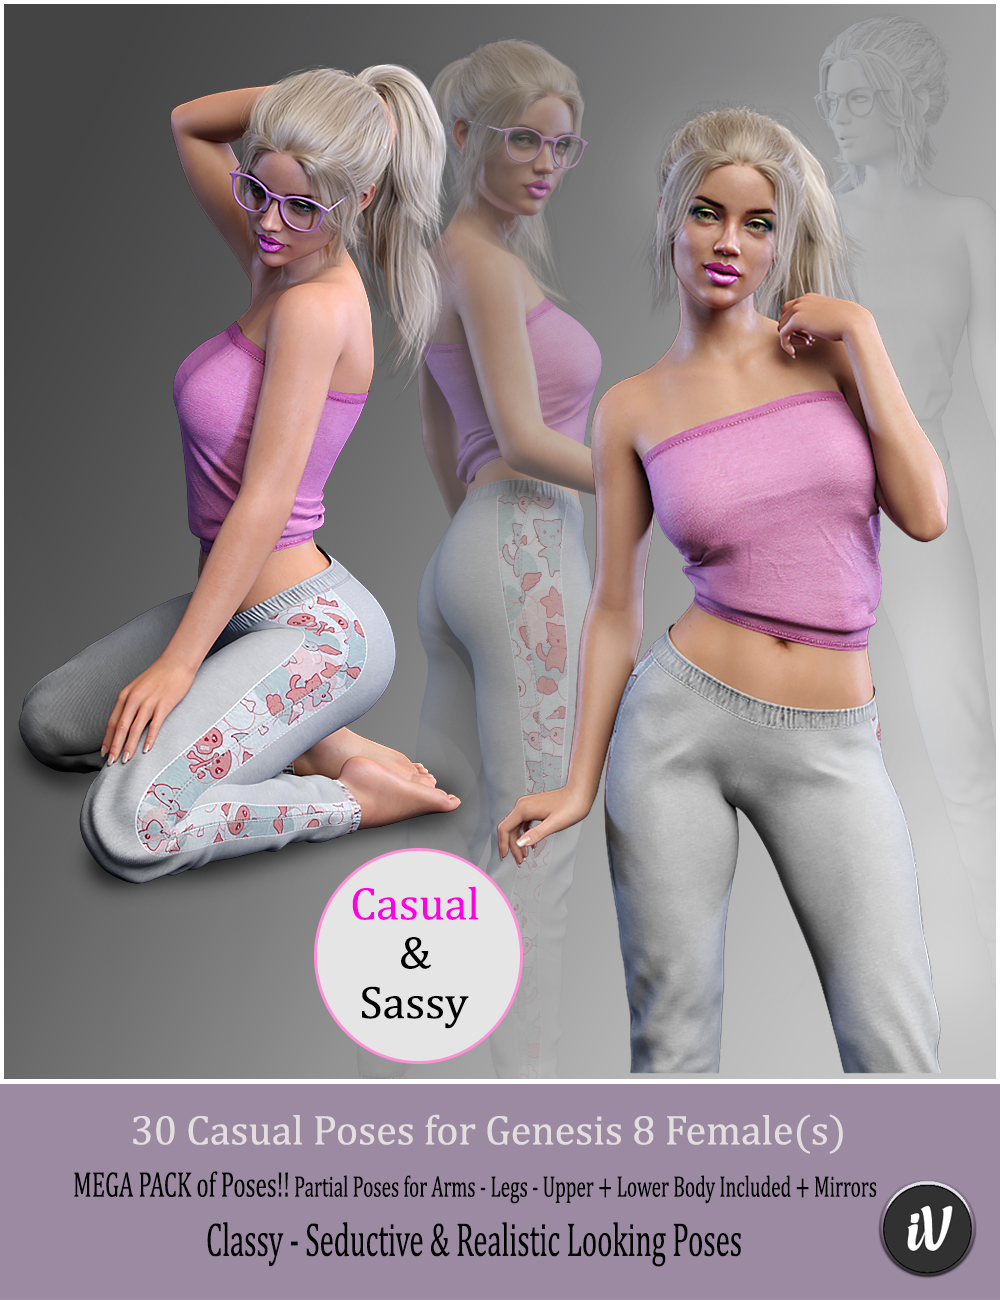 iV Casual Poses For Genesis 8 Female(s) by: i3D_LotusValery3D, 3D Models by Daz 3D